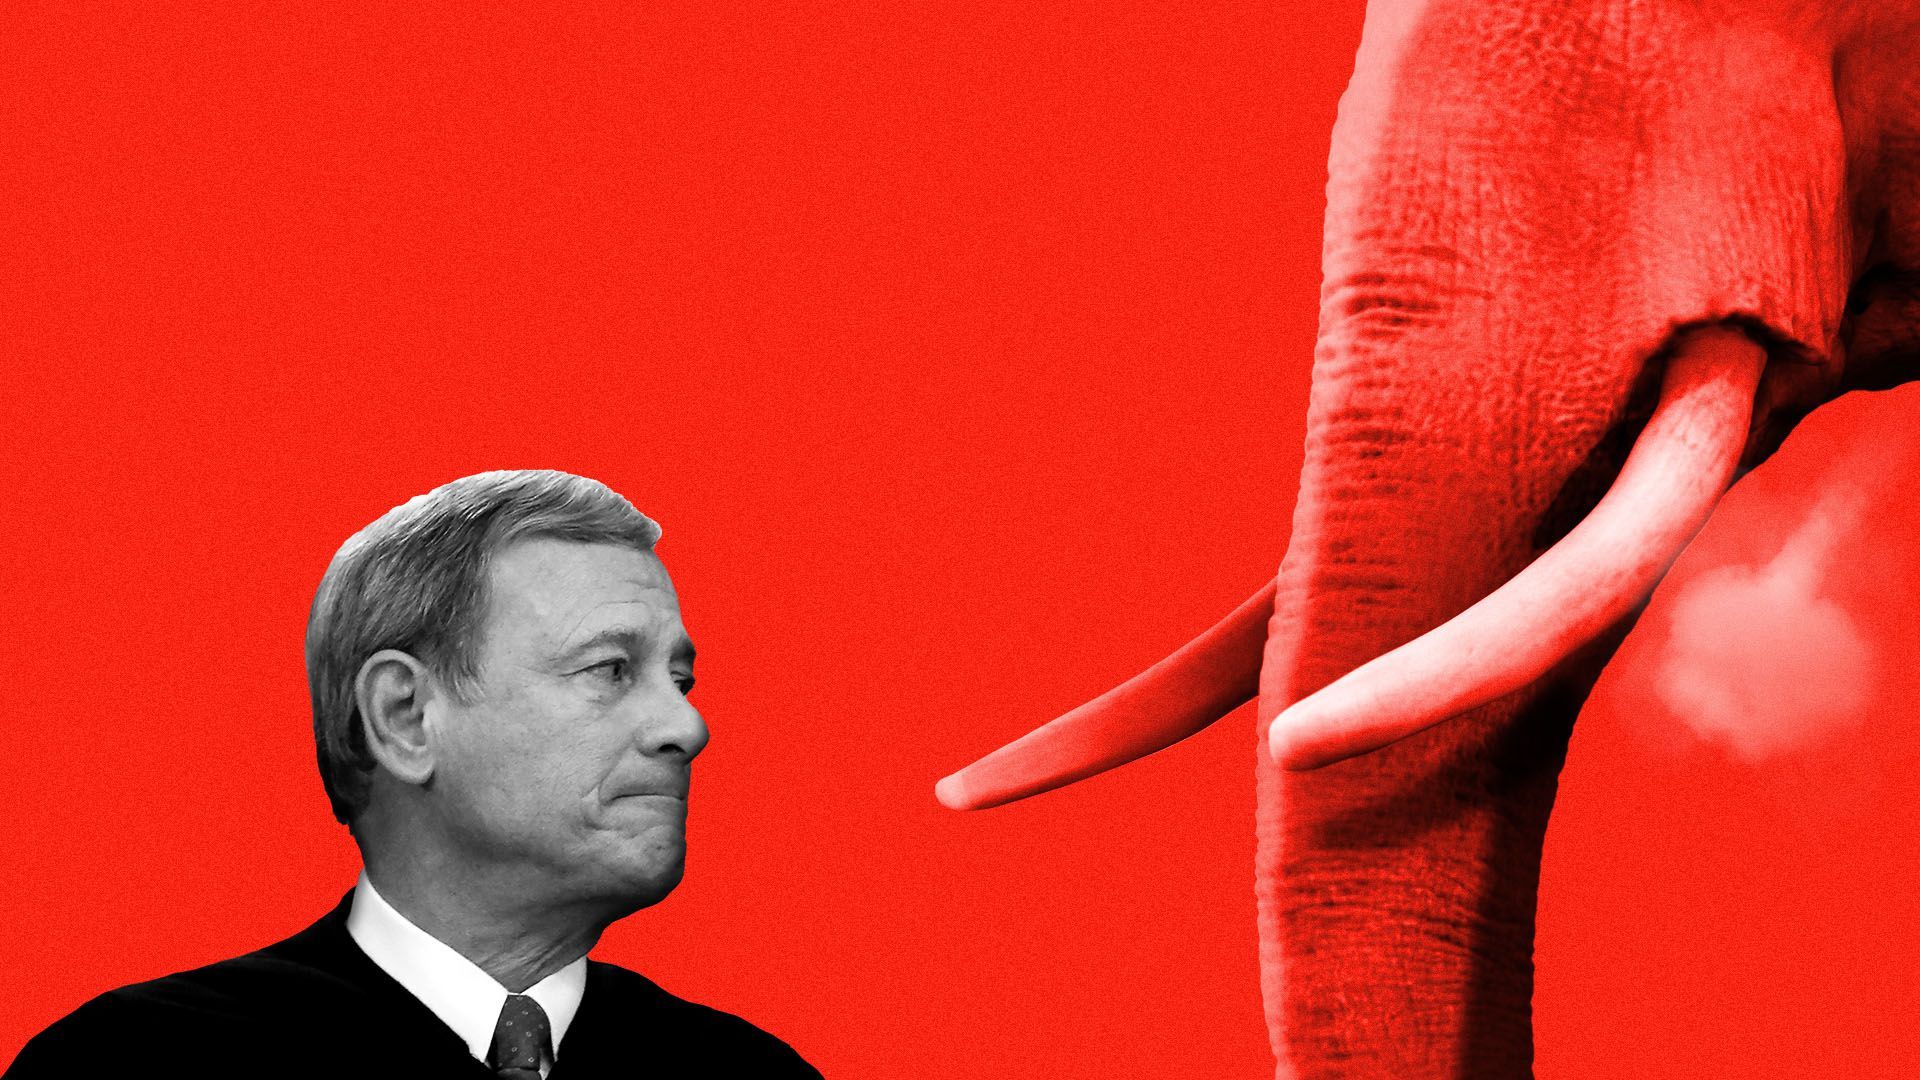 Illustration of an angry elephant next to John Roberts